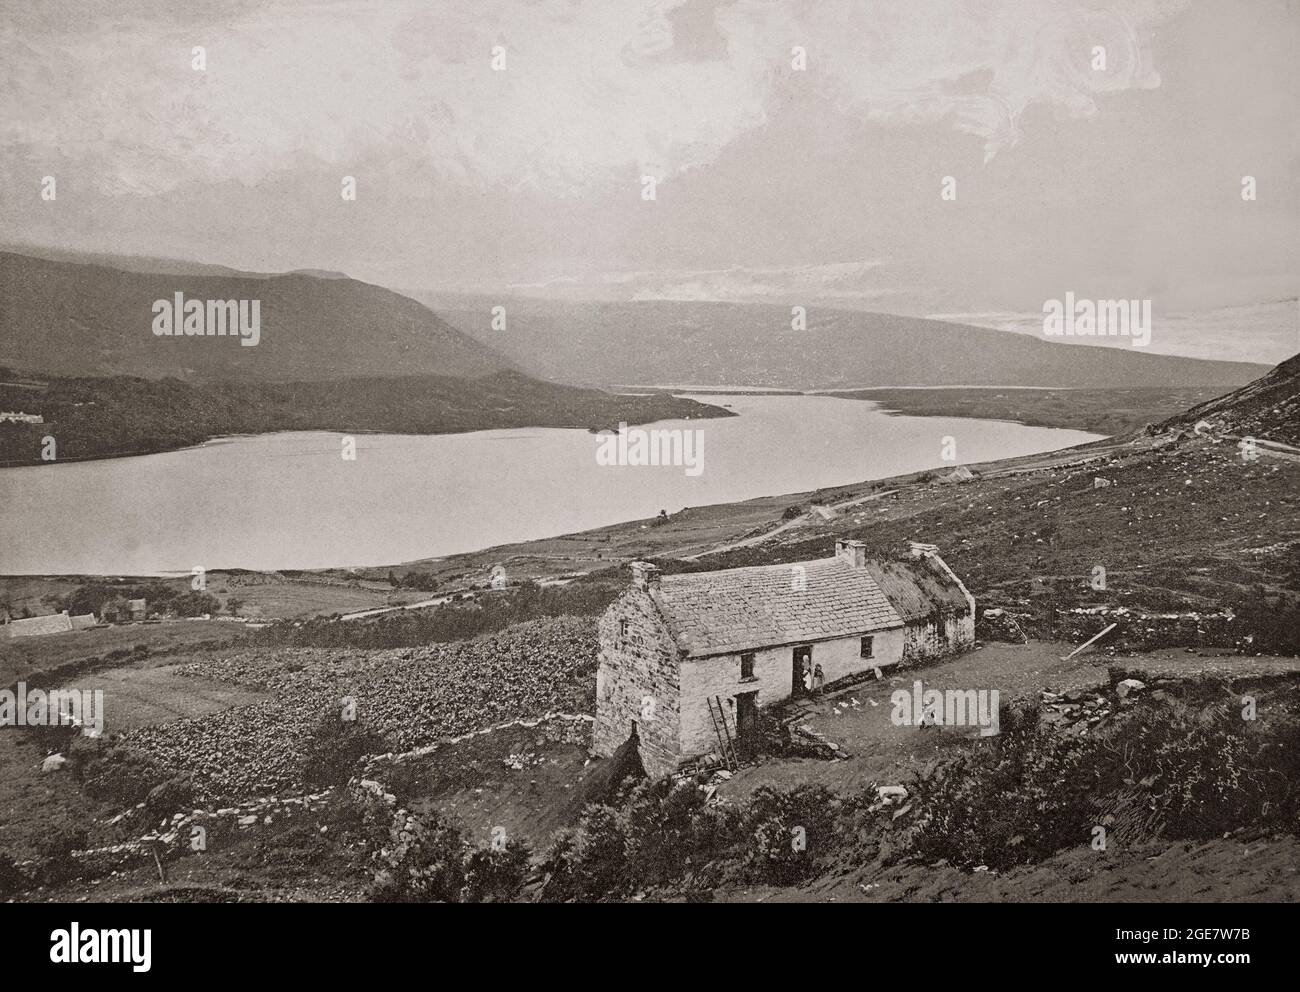 A late 19th century view of Dunlewey Lough, or Dunlewy Lough, in County Donegal, Ireland. It lies at the foot of Errigal and beside the hamlet of Dunlewey (or Dunlewy). Long settled, there's the remains of a crannóg (a fortified lake dwelling) on the lake, which  may be the source of the name Dún Lúiche, which means 'Lugh's fort'. Stock Photo